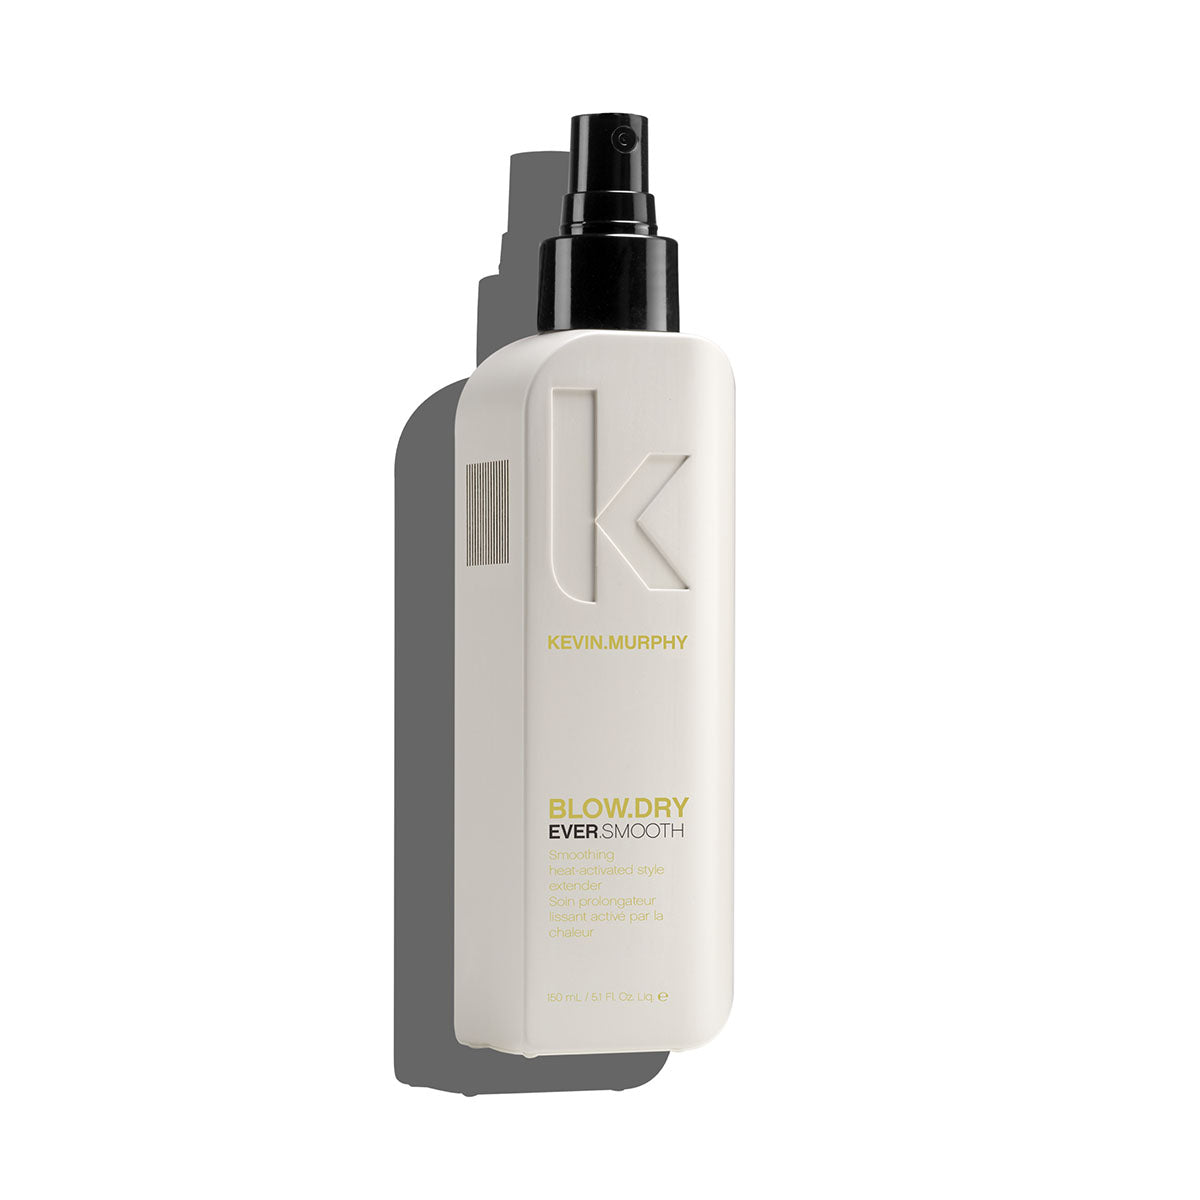 KEVIN.MURPHY Blow Dry Ever Smooth 150ml